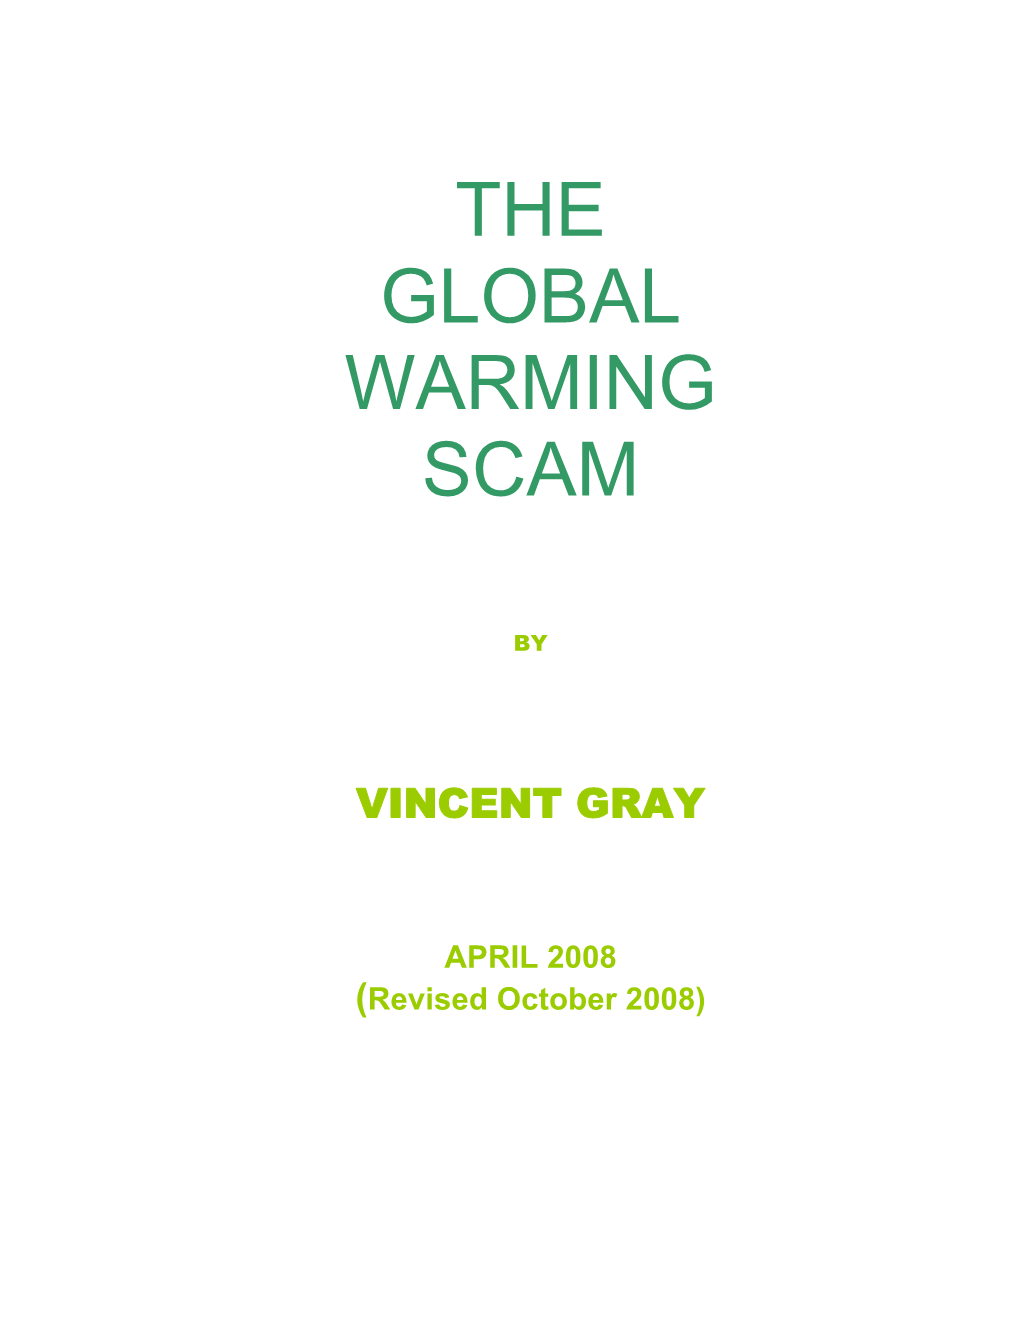 The Global Warming Scam